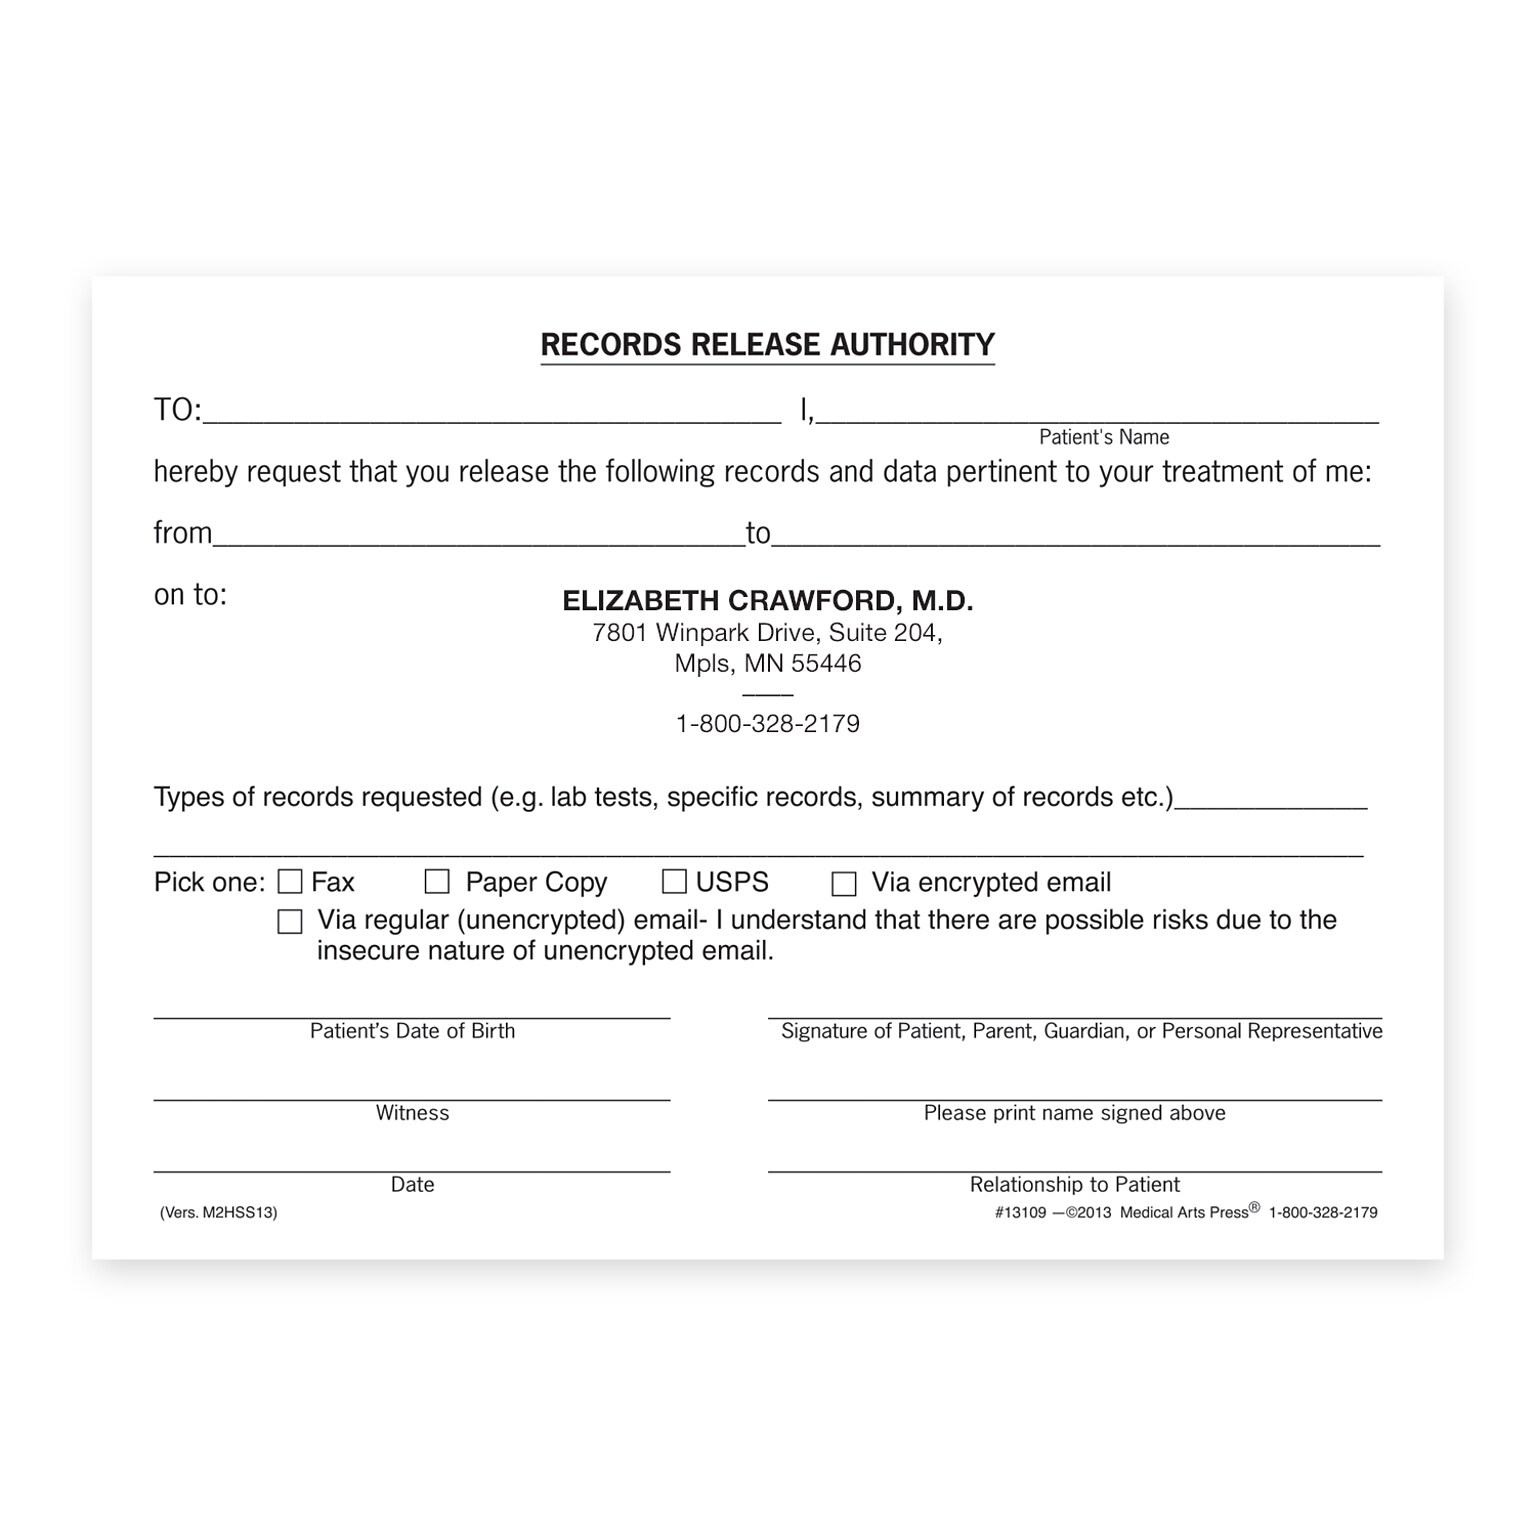 Custom Record Release Authority Slips, 5-1/2 x 4, 100 Sheets per Pad